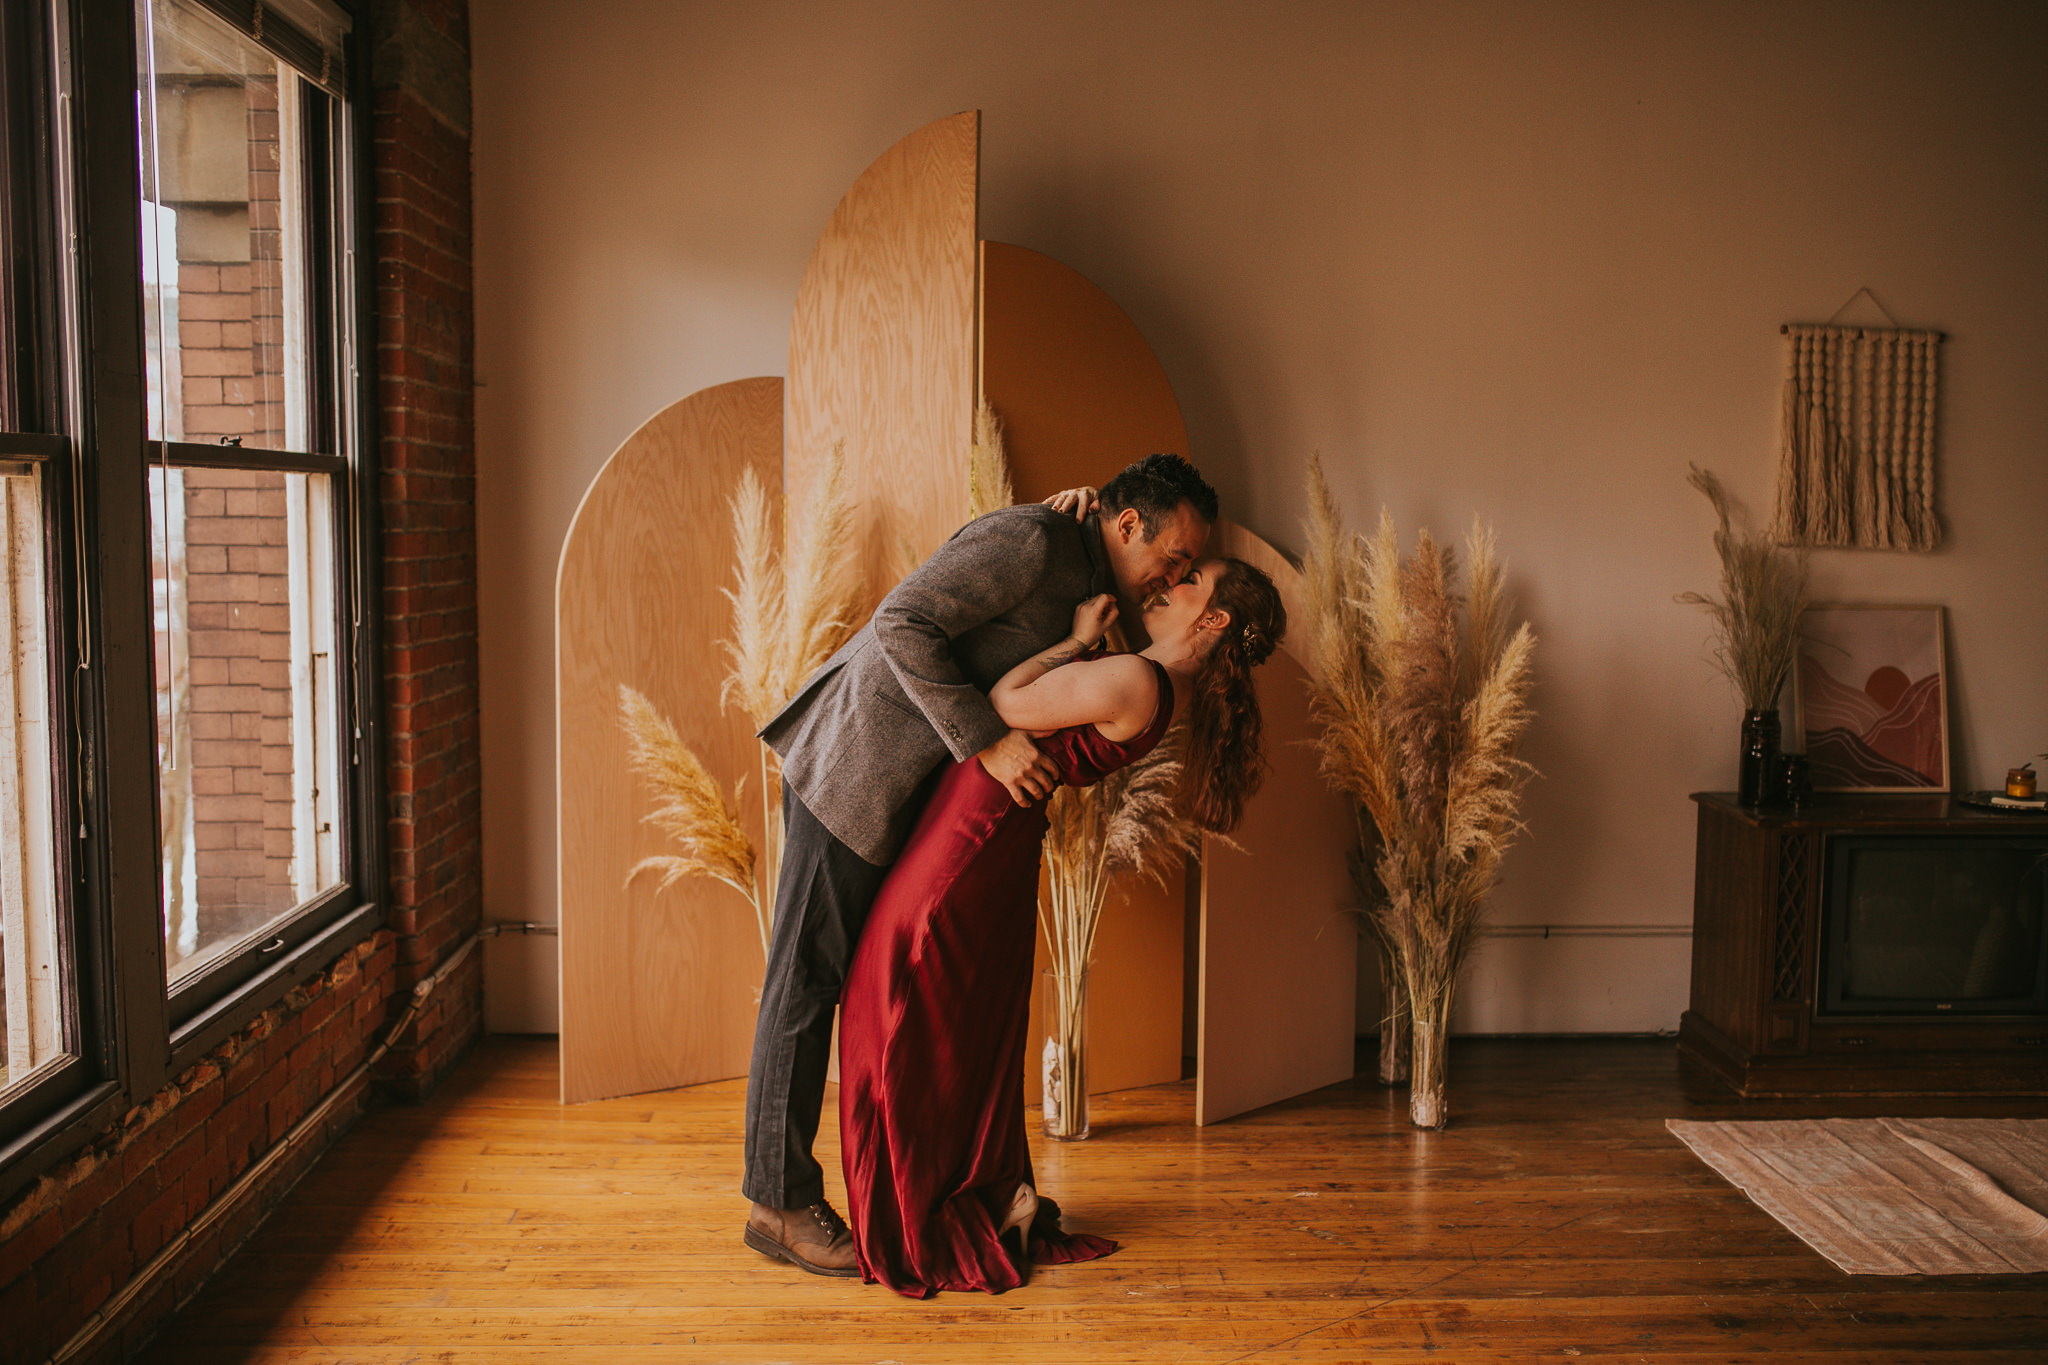 bride and groom dip into a kiss in front of the wedding arch in a photo studio bride is wearing a read dress and groom is wearing a grey tuxedo